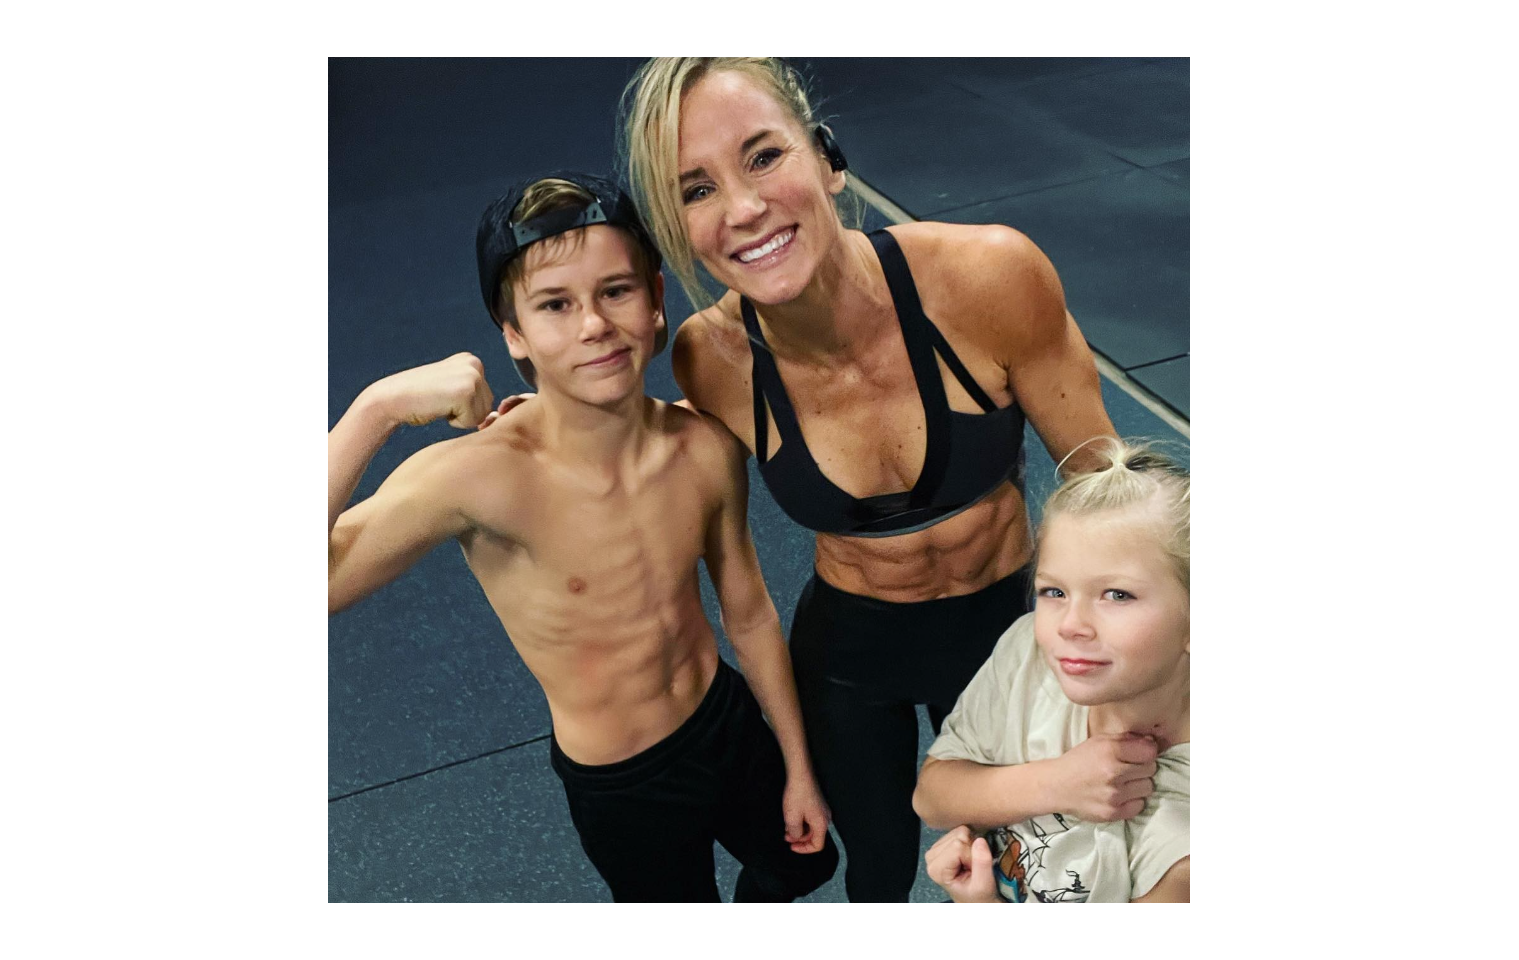 Jes Bowen and Daughter: Breaking Barriers, Lifting Spirits - A Fitness Journey Beyond Limits